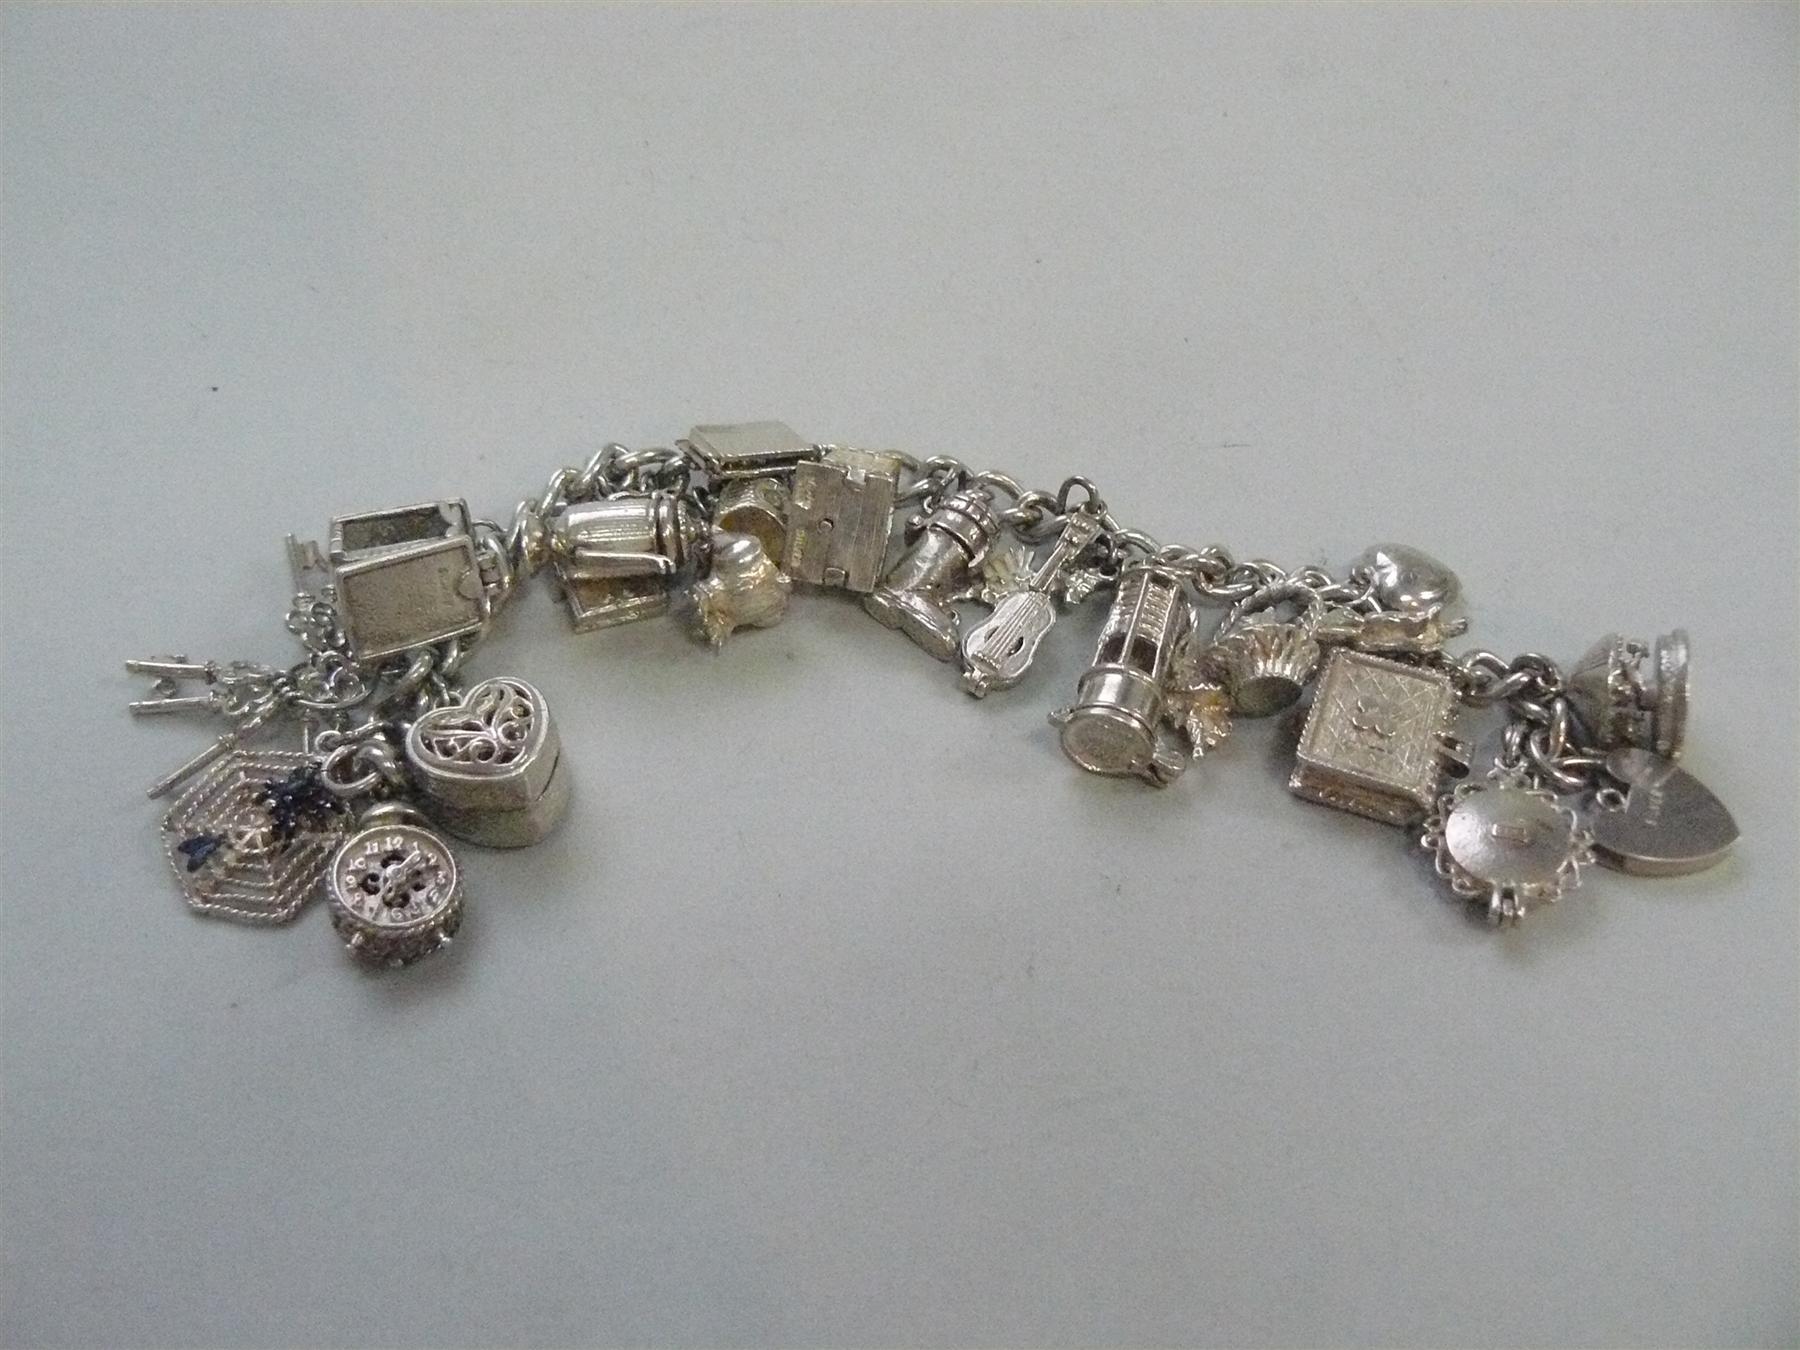 A silver charm bracelet with twenty-one attached charms.